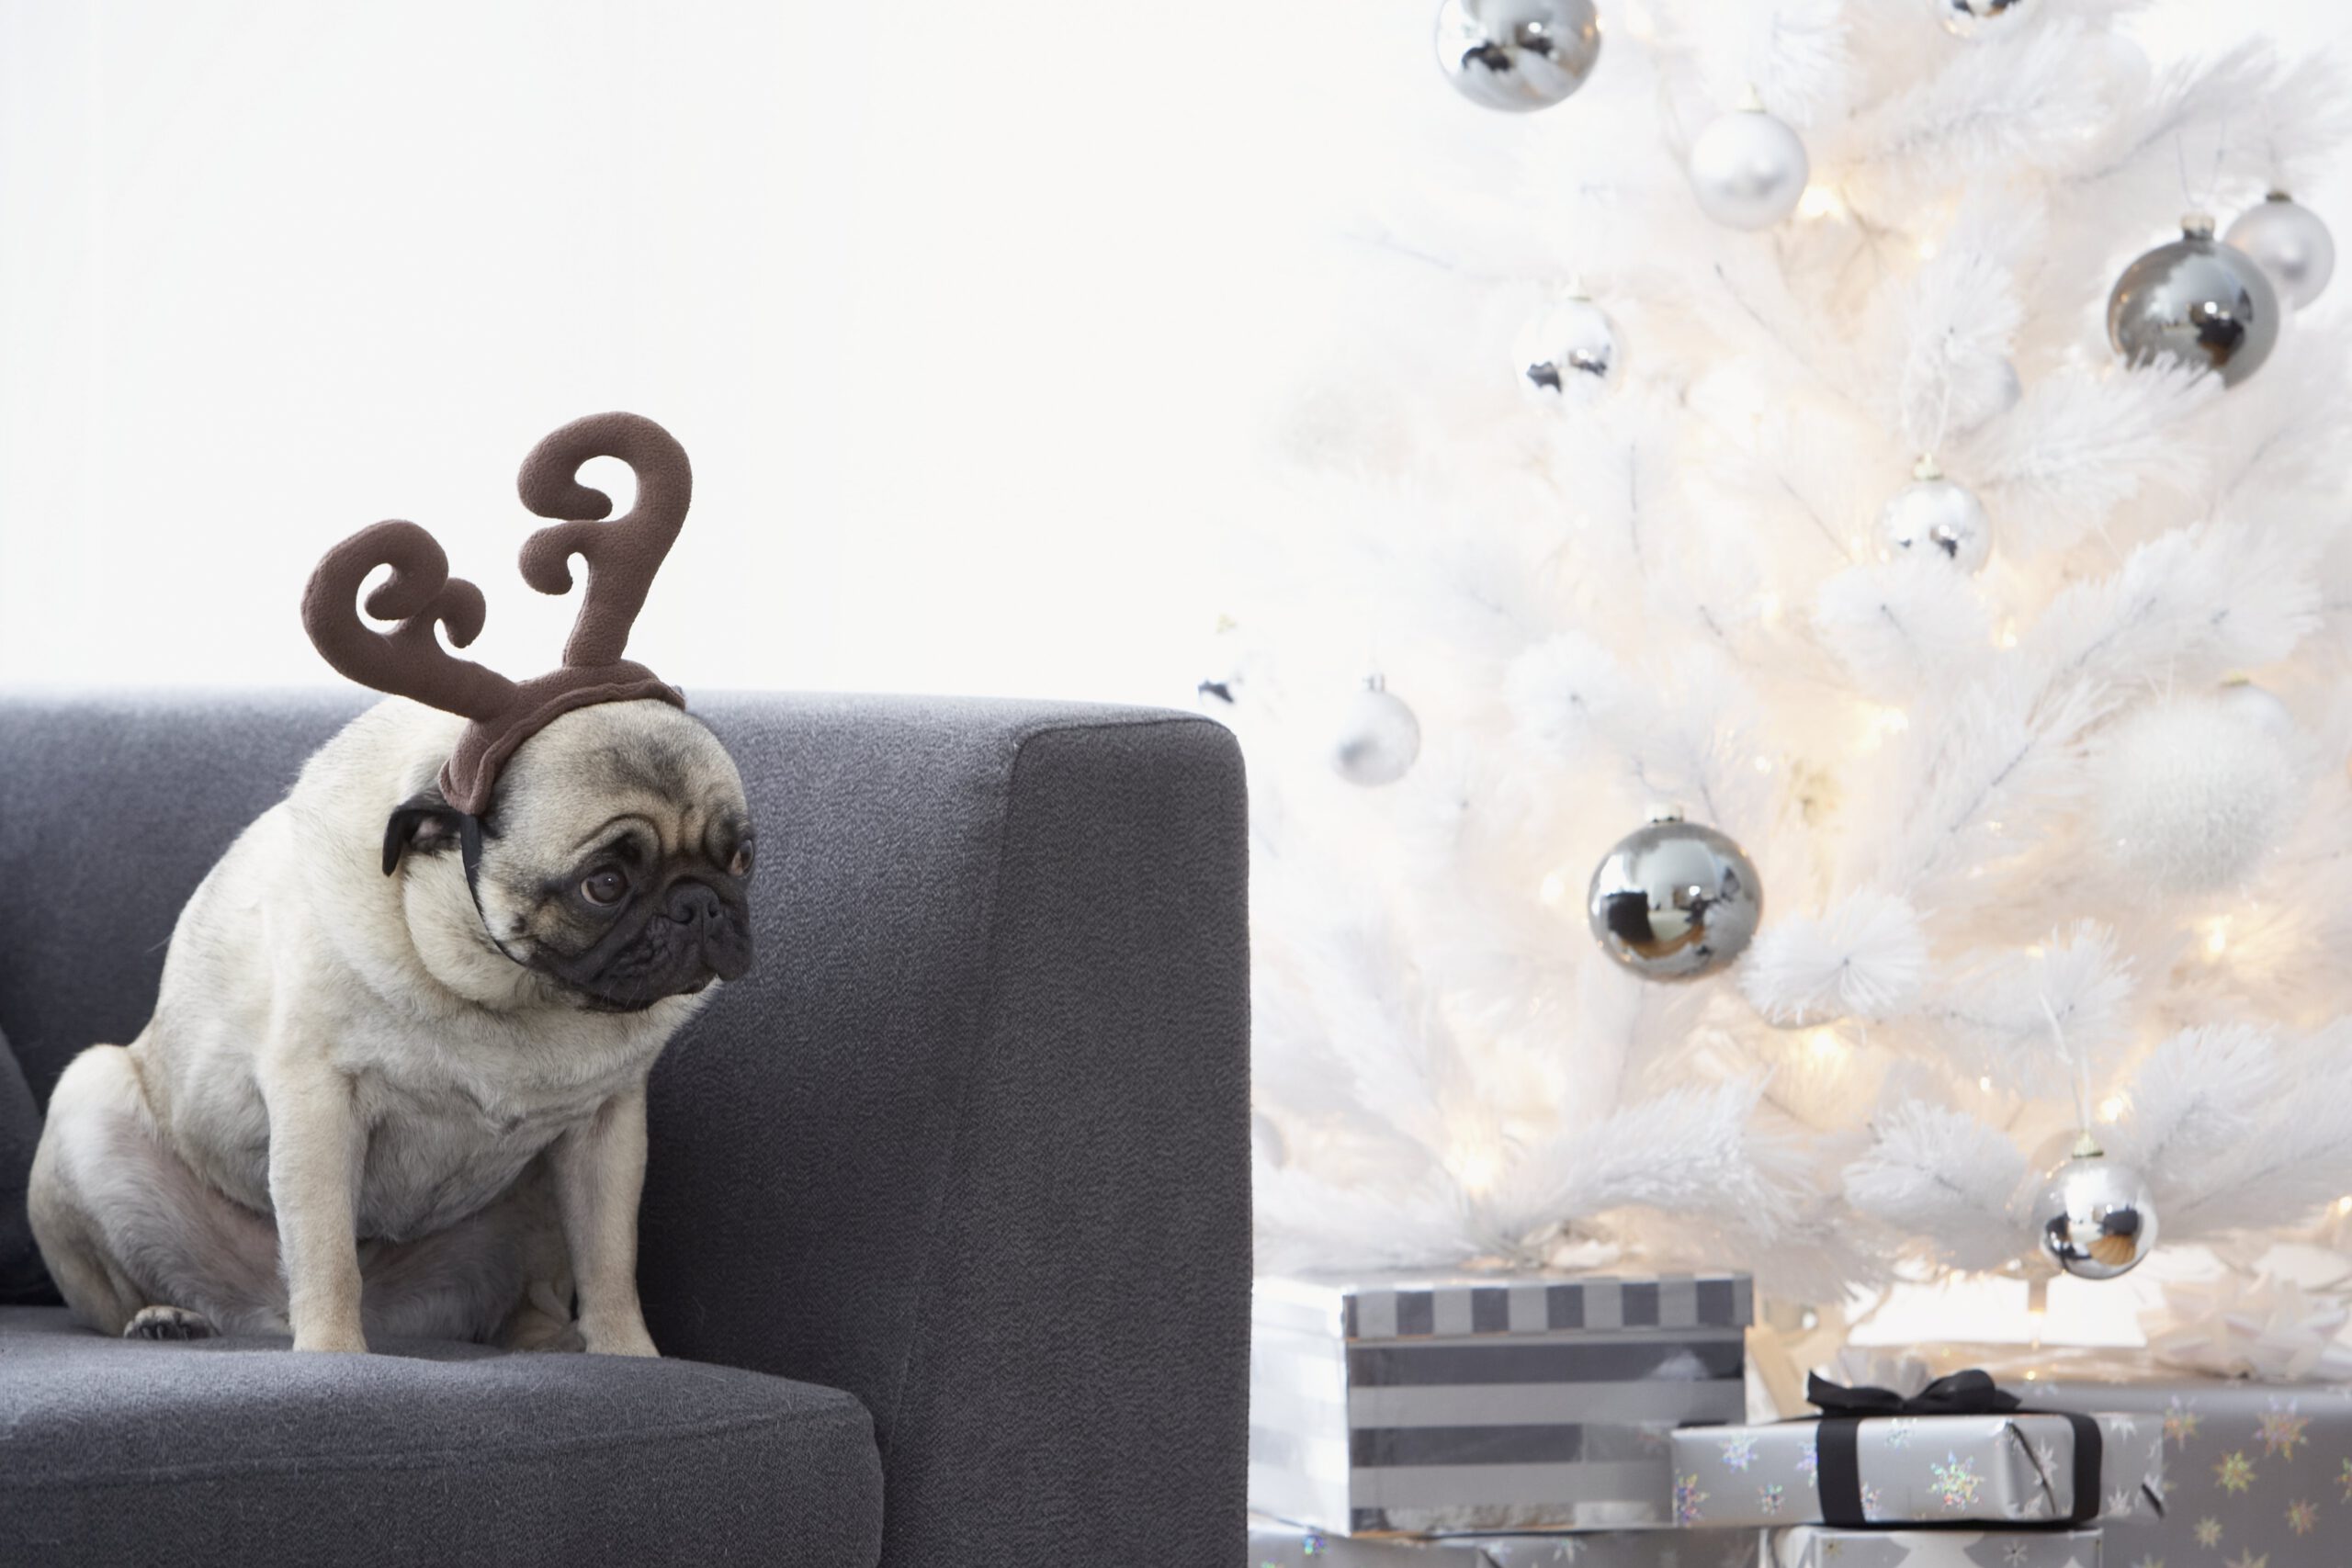 A sad pug wearing reindeer antlers next to a Christmas tree.